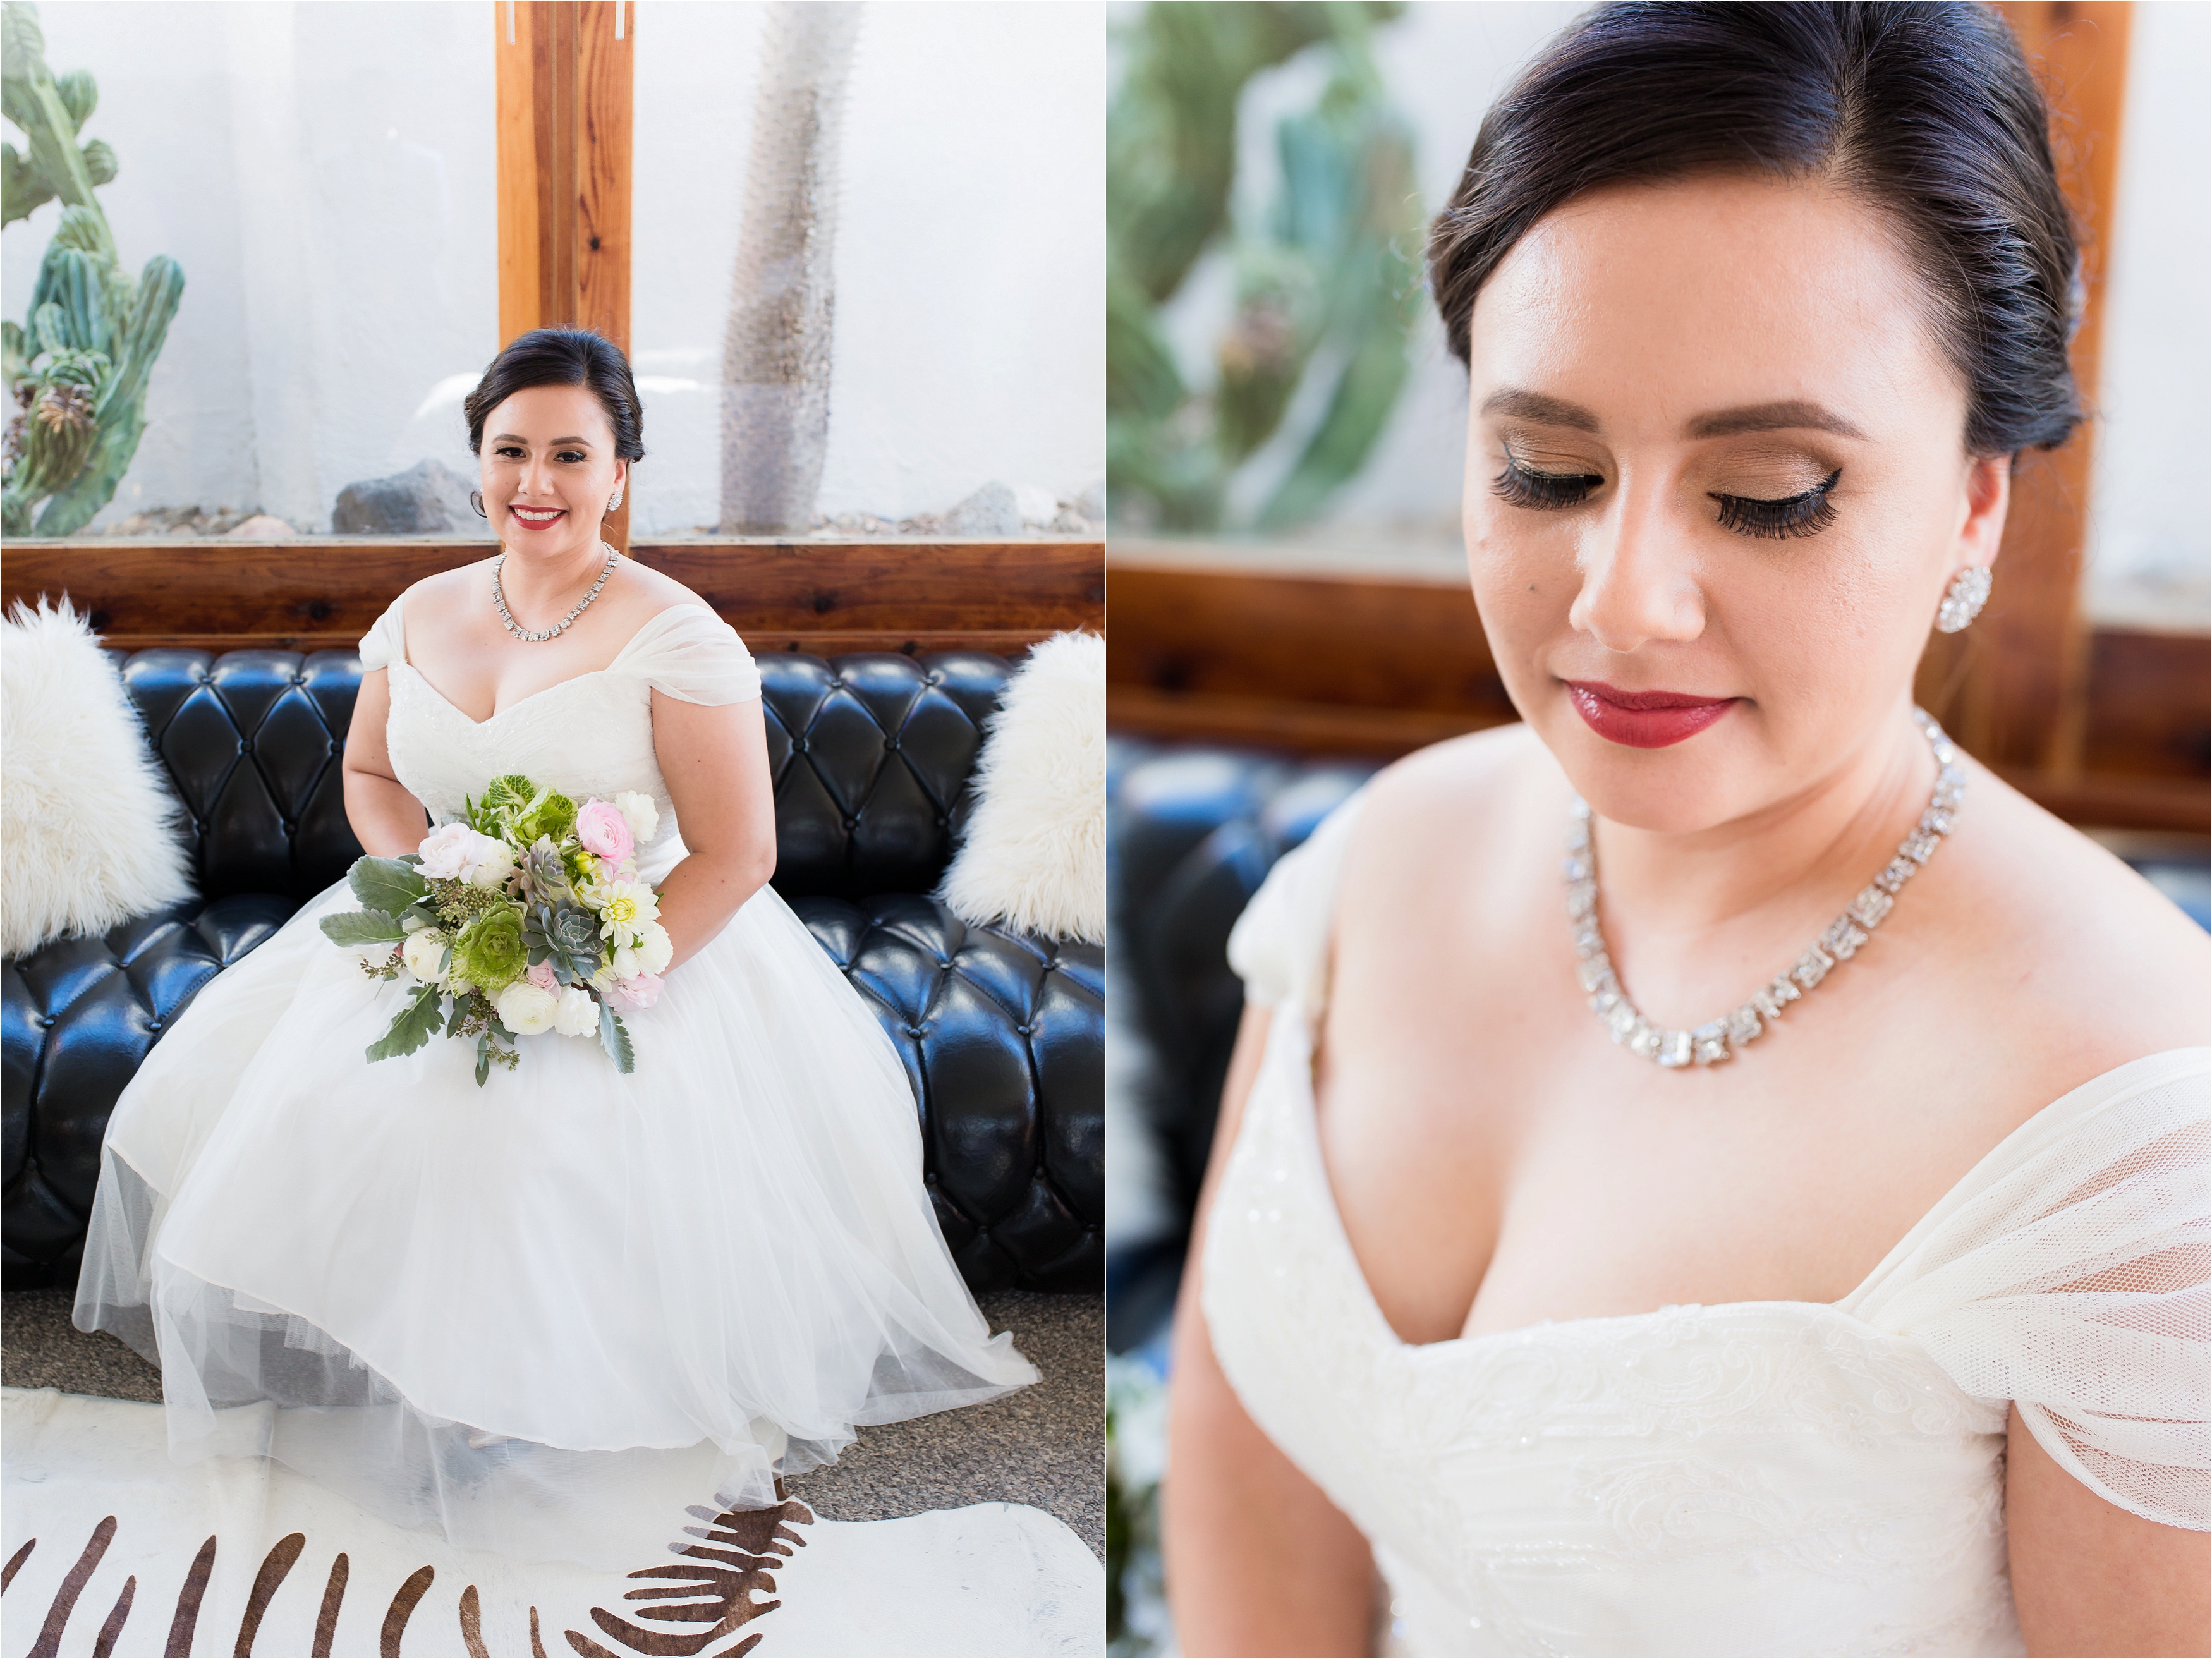 Bridal portrait sitting on black leather couch with wedding bouquet